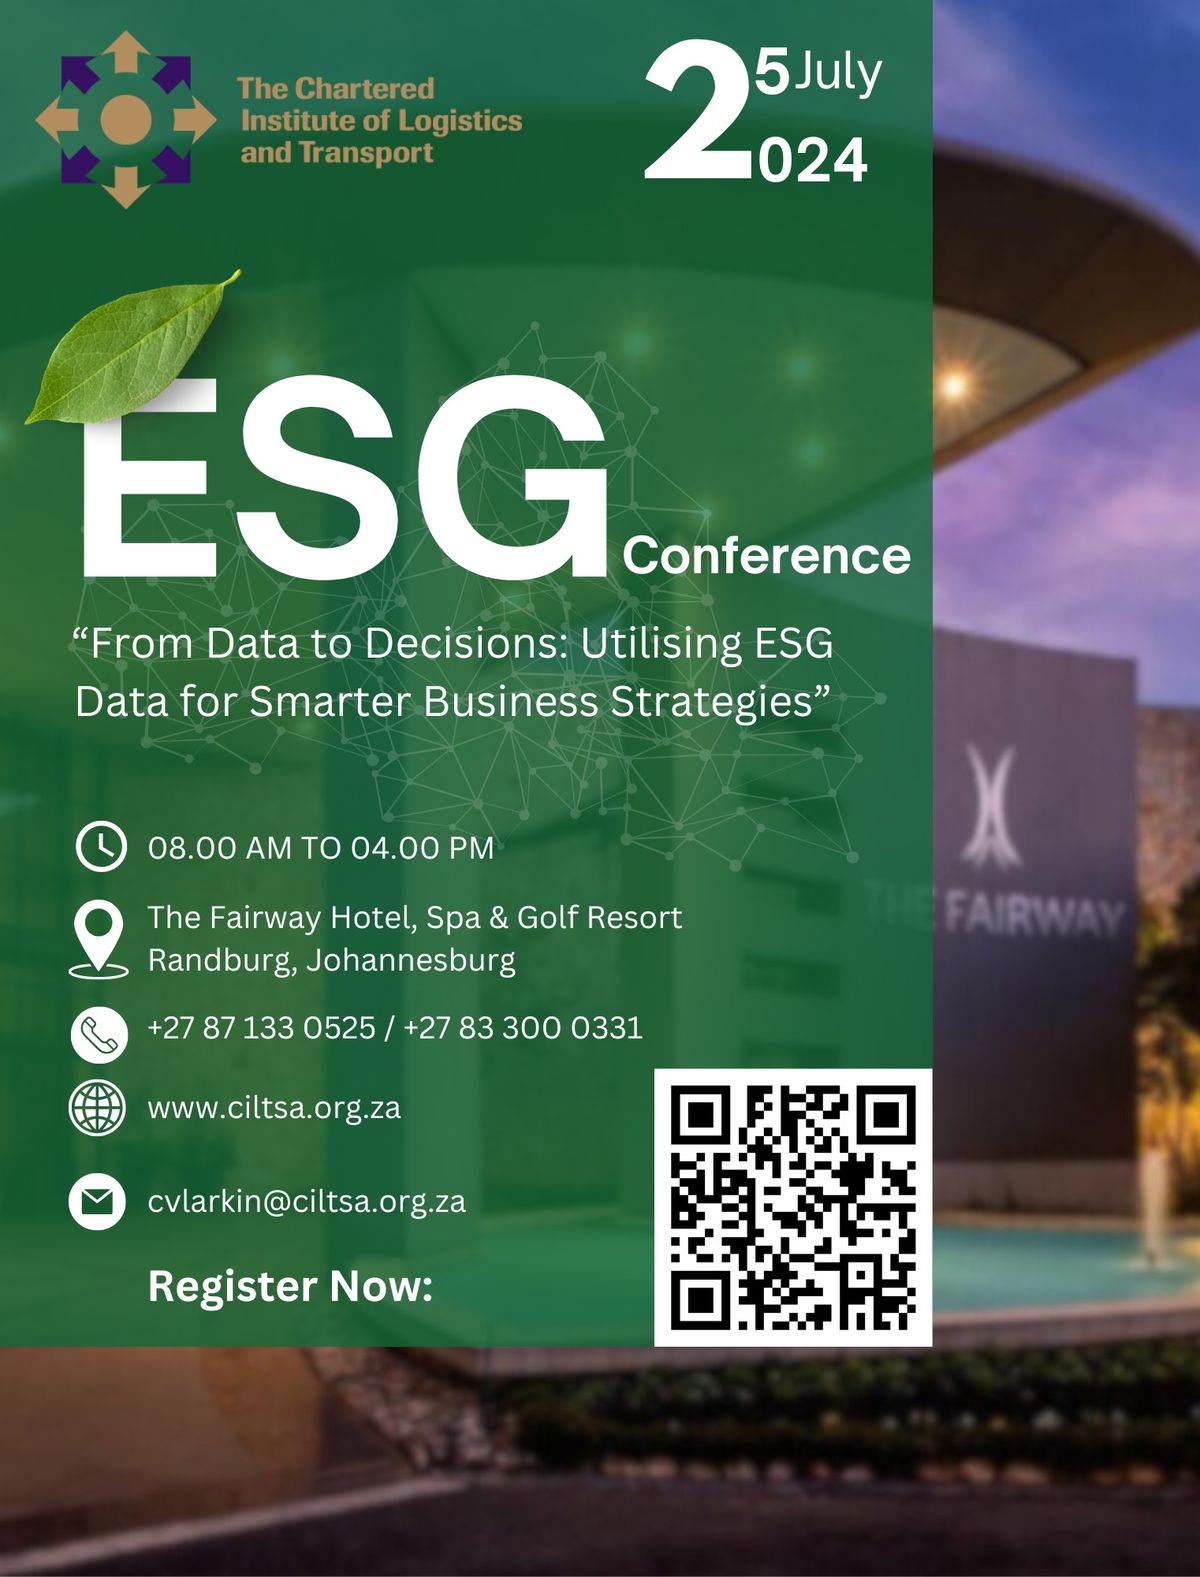 ESG Conference: "From Data to decisions: Utilising ESG Data for Smarter Business Strategies"